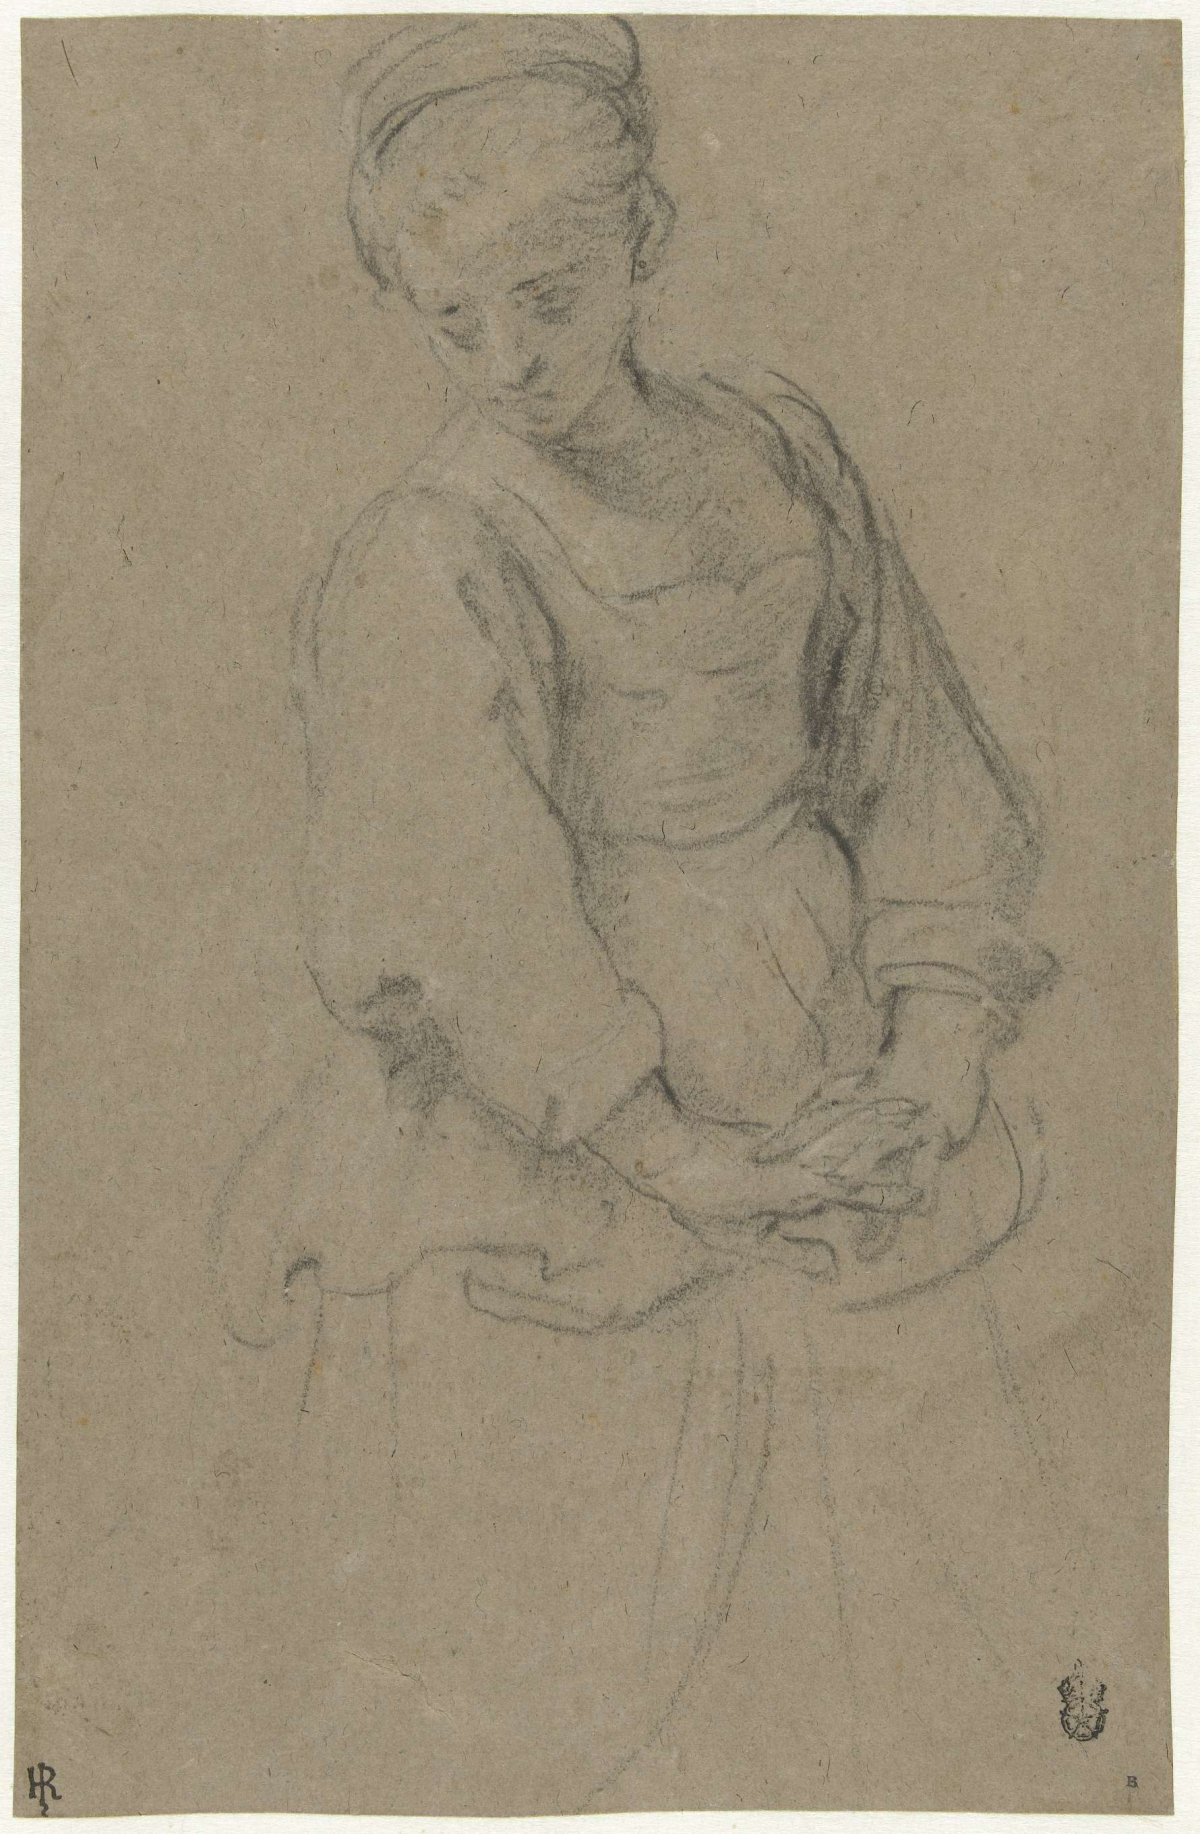 Standing young woman with folded hands, Domenichino, 1591 - 1641